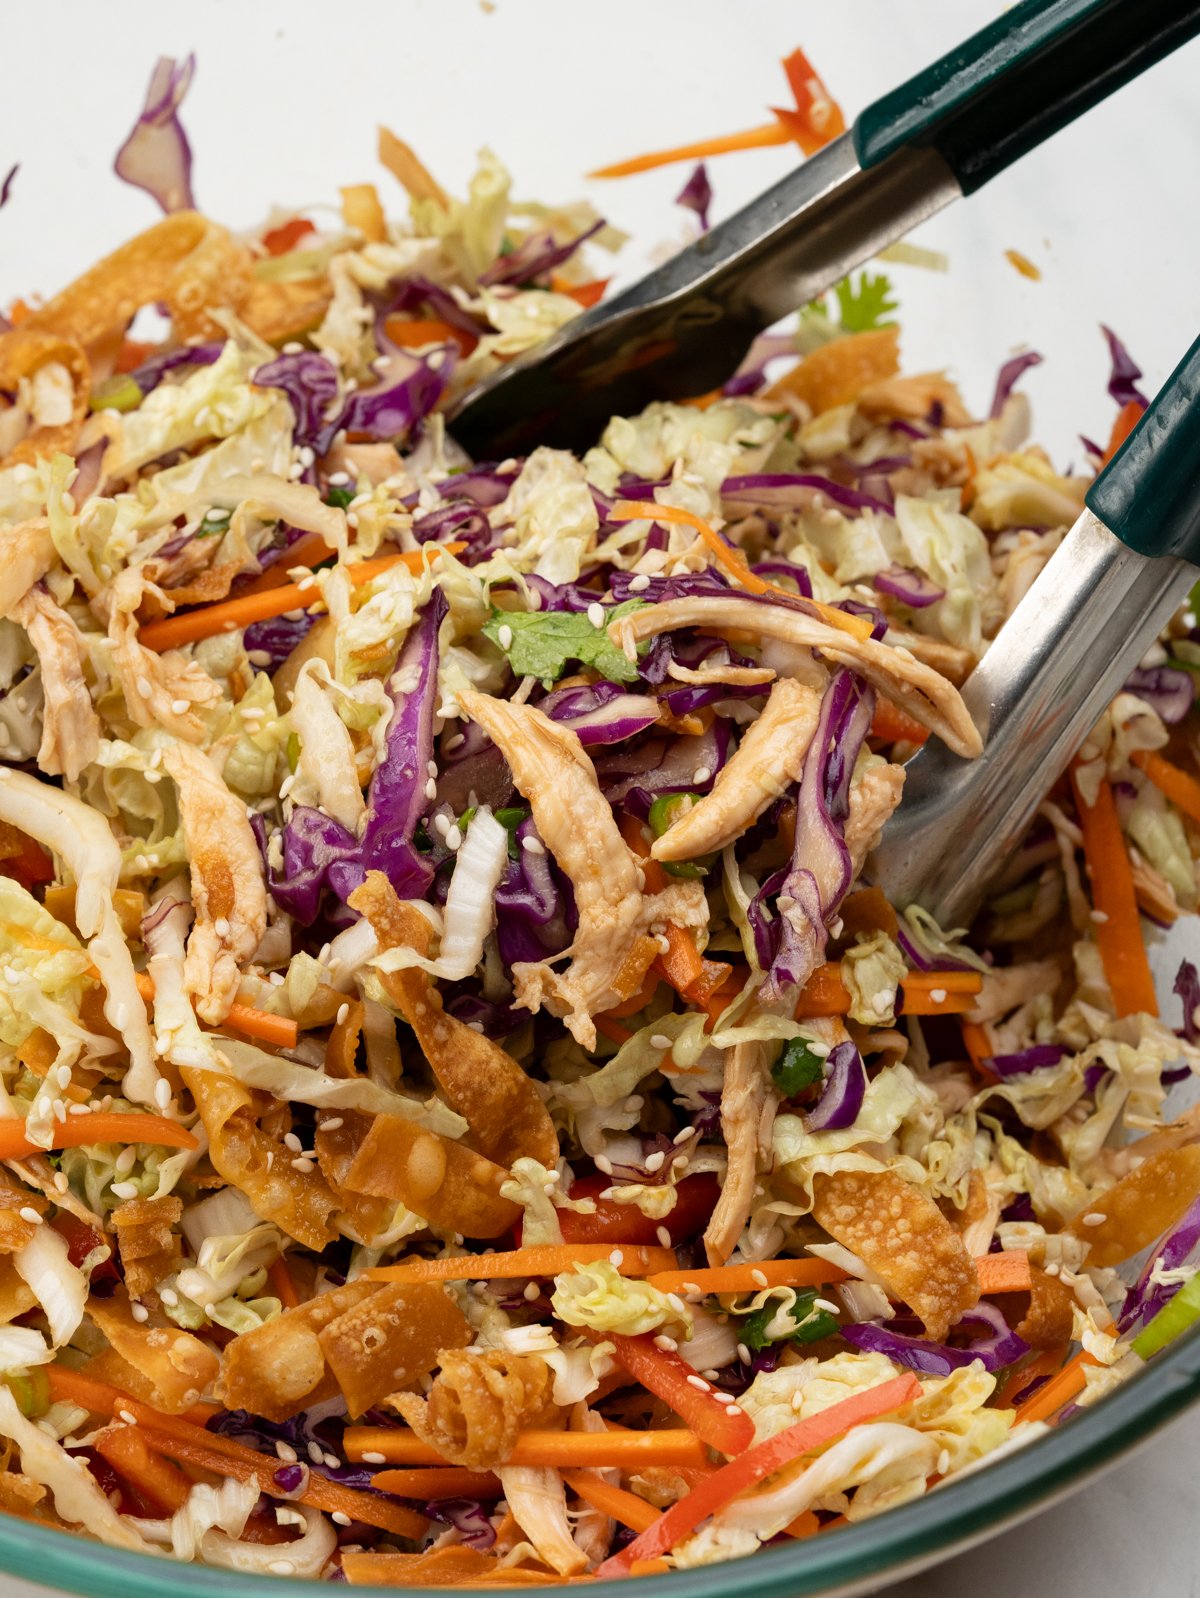 shredded chicken, cabbage, carrots, peppers all tossed in an Asian Sesame Dressing. 